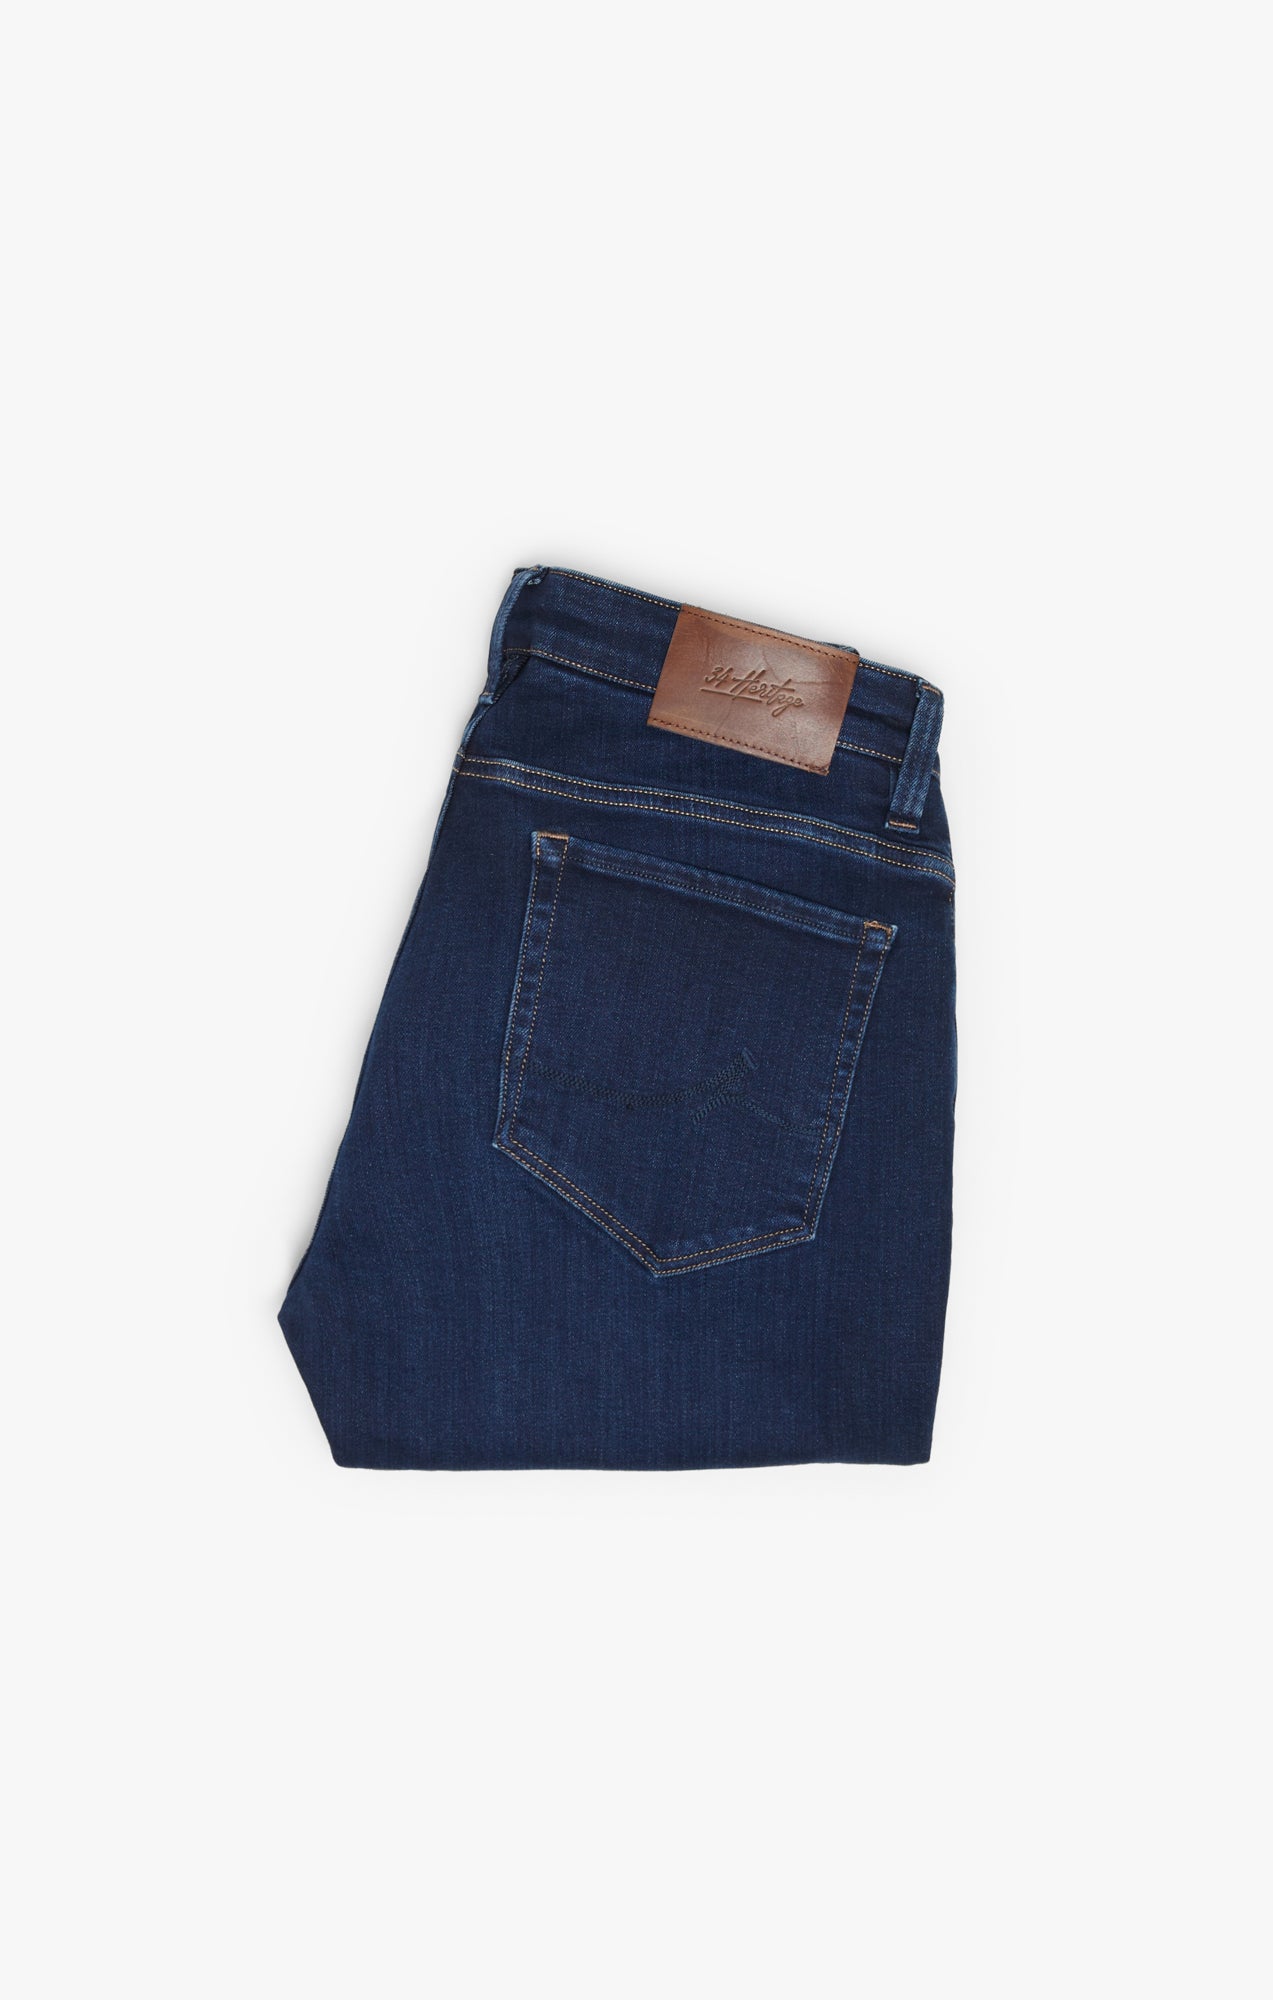 Courage Straight Leg Jeans In Dark Brushed Organic Image 9